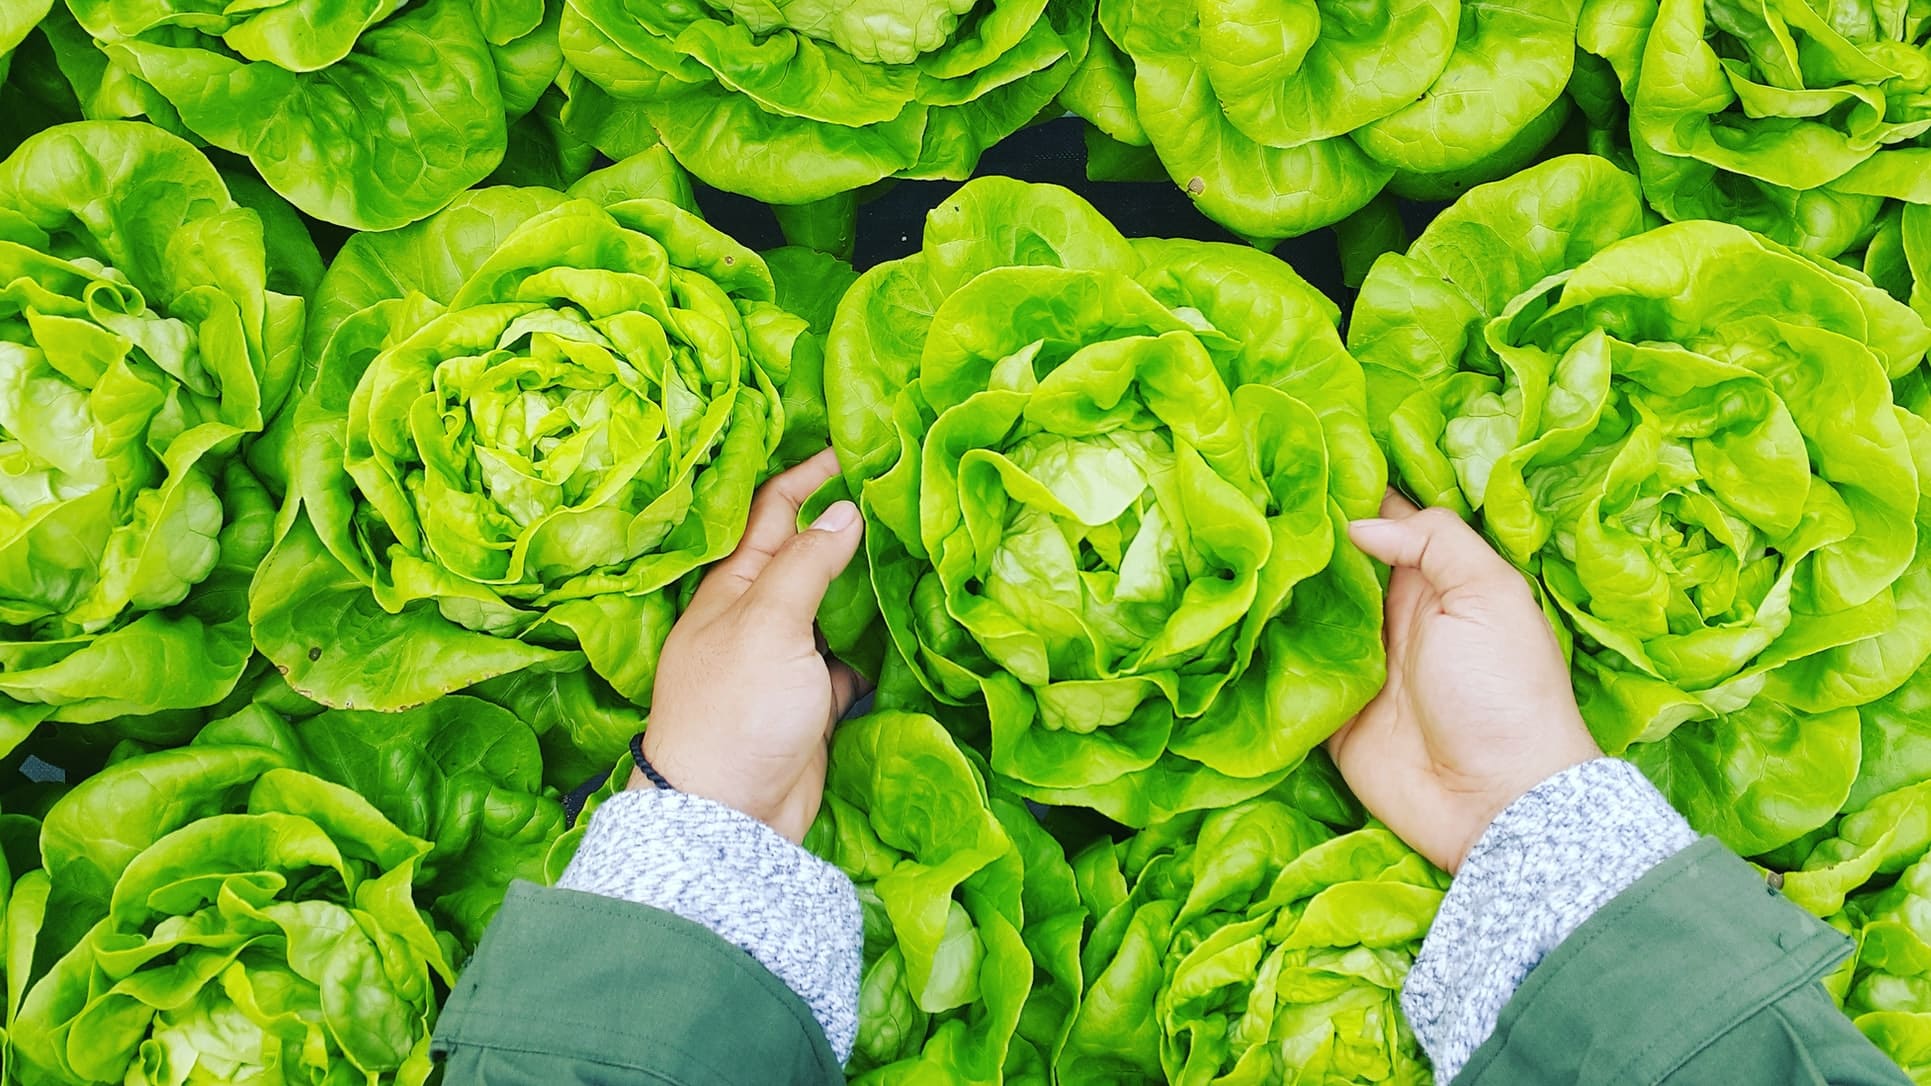 Boston Lettuce | The Ultimate Guide to This Obscure Leafy Green